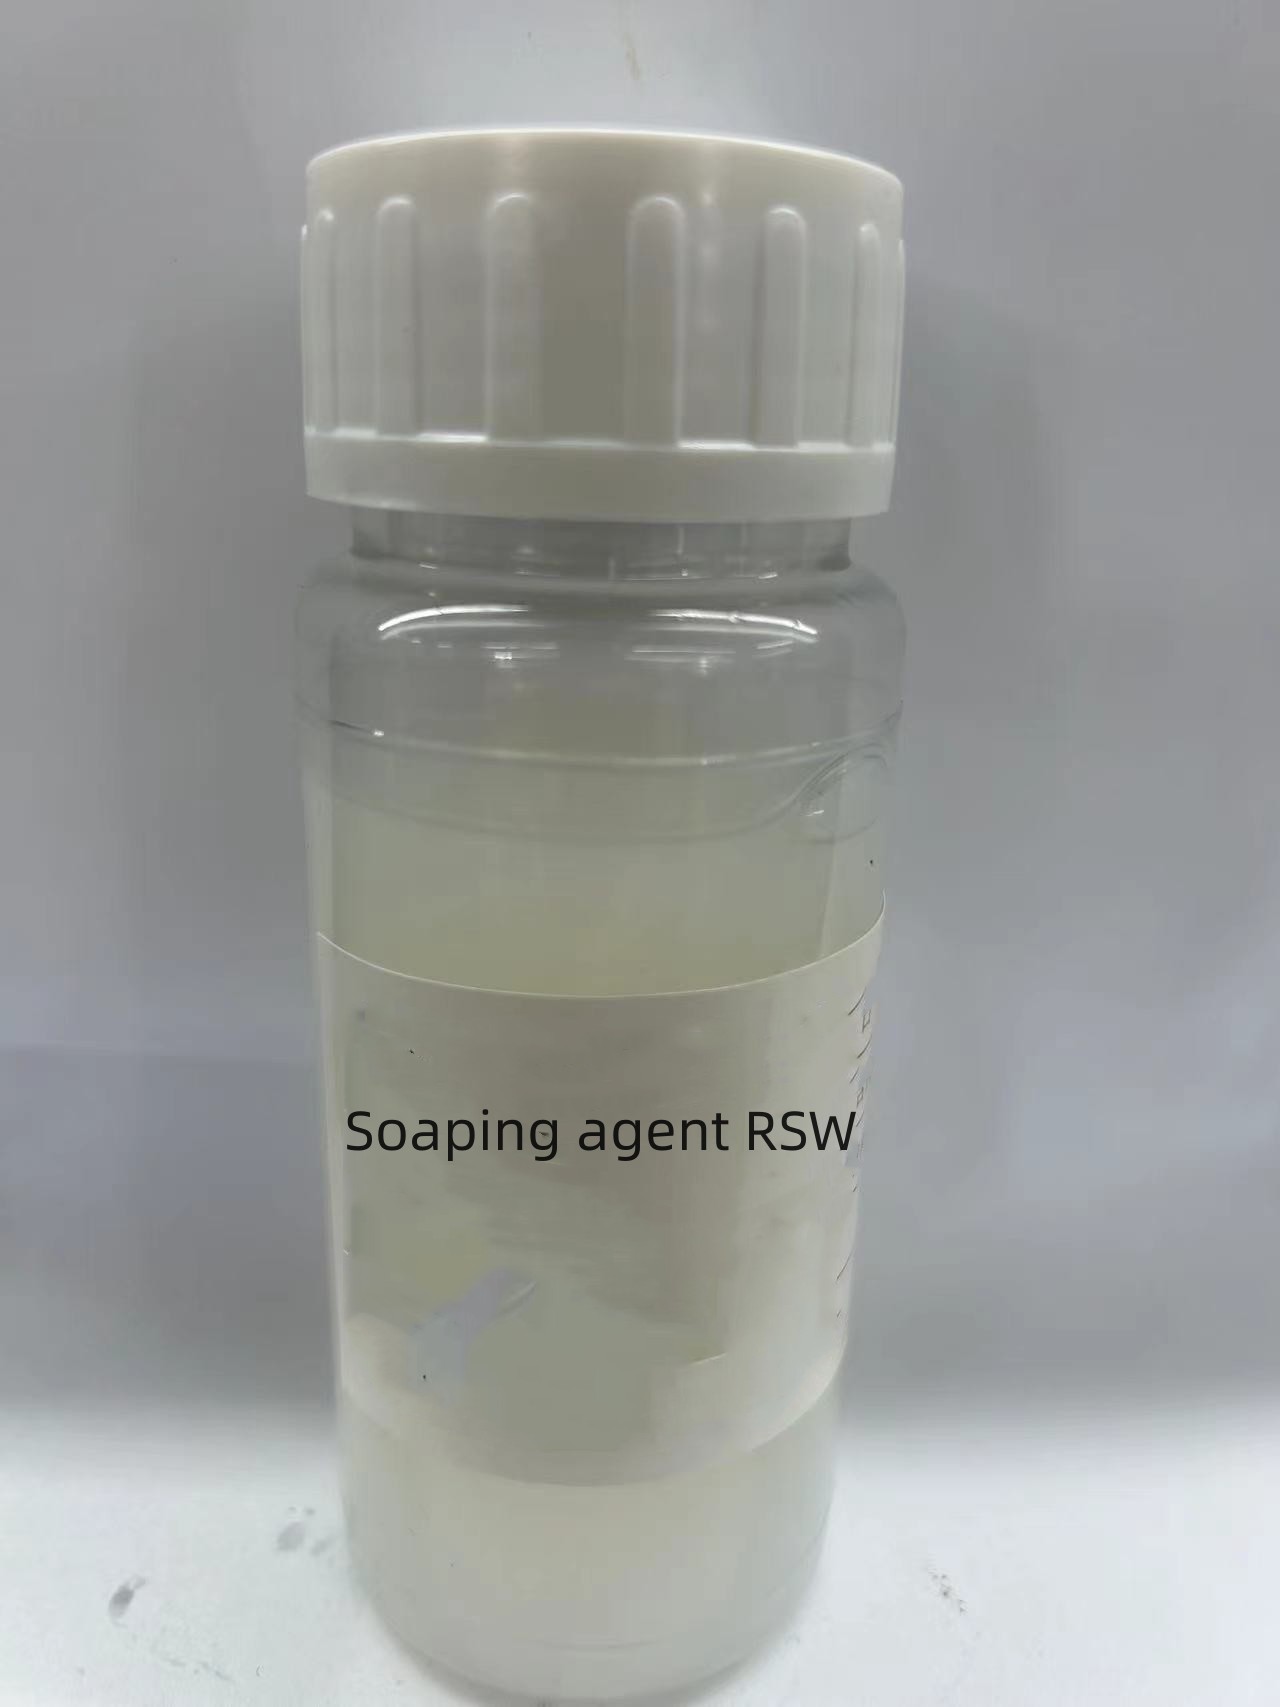 Soaping agent RSW